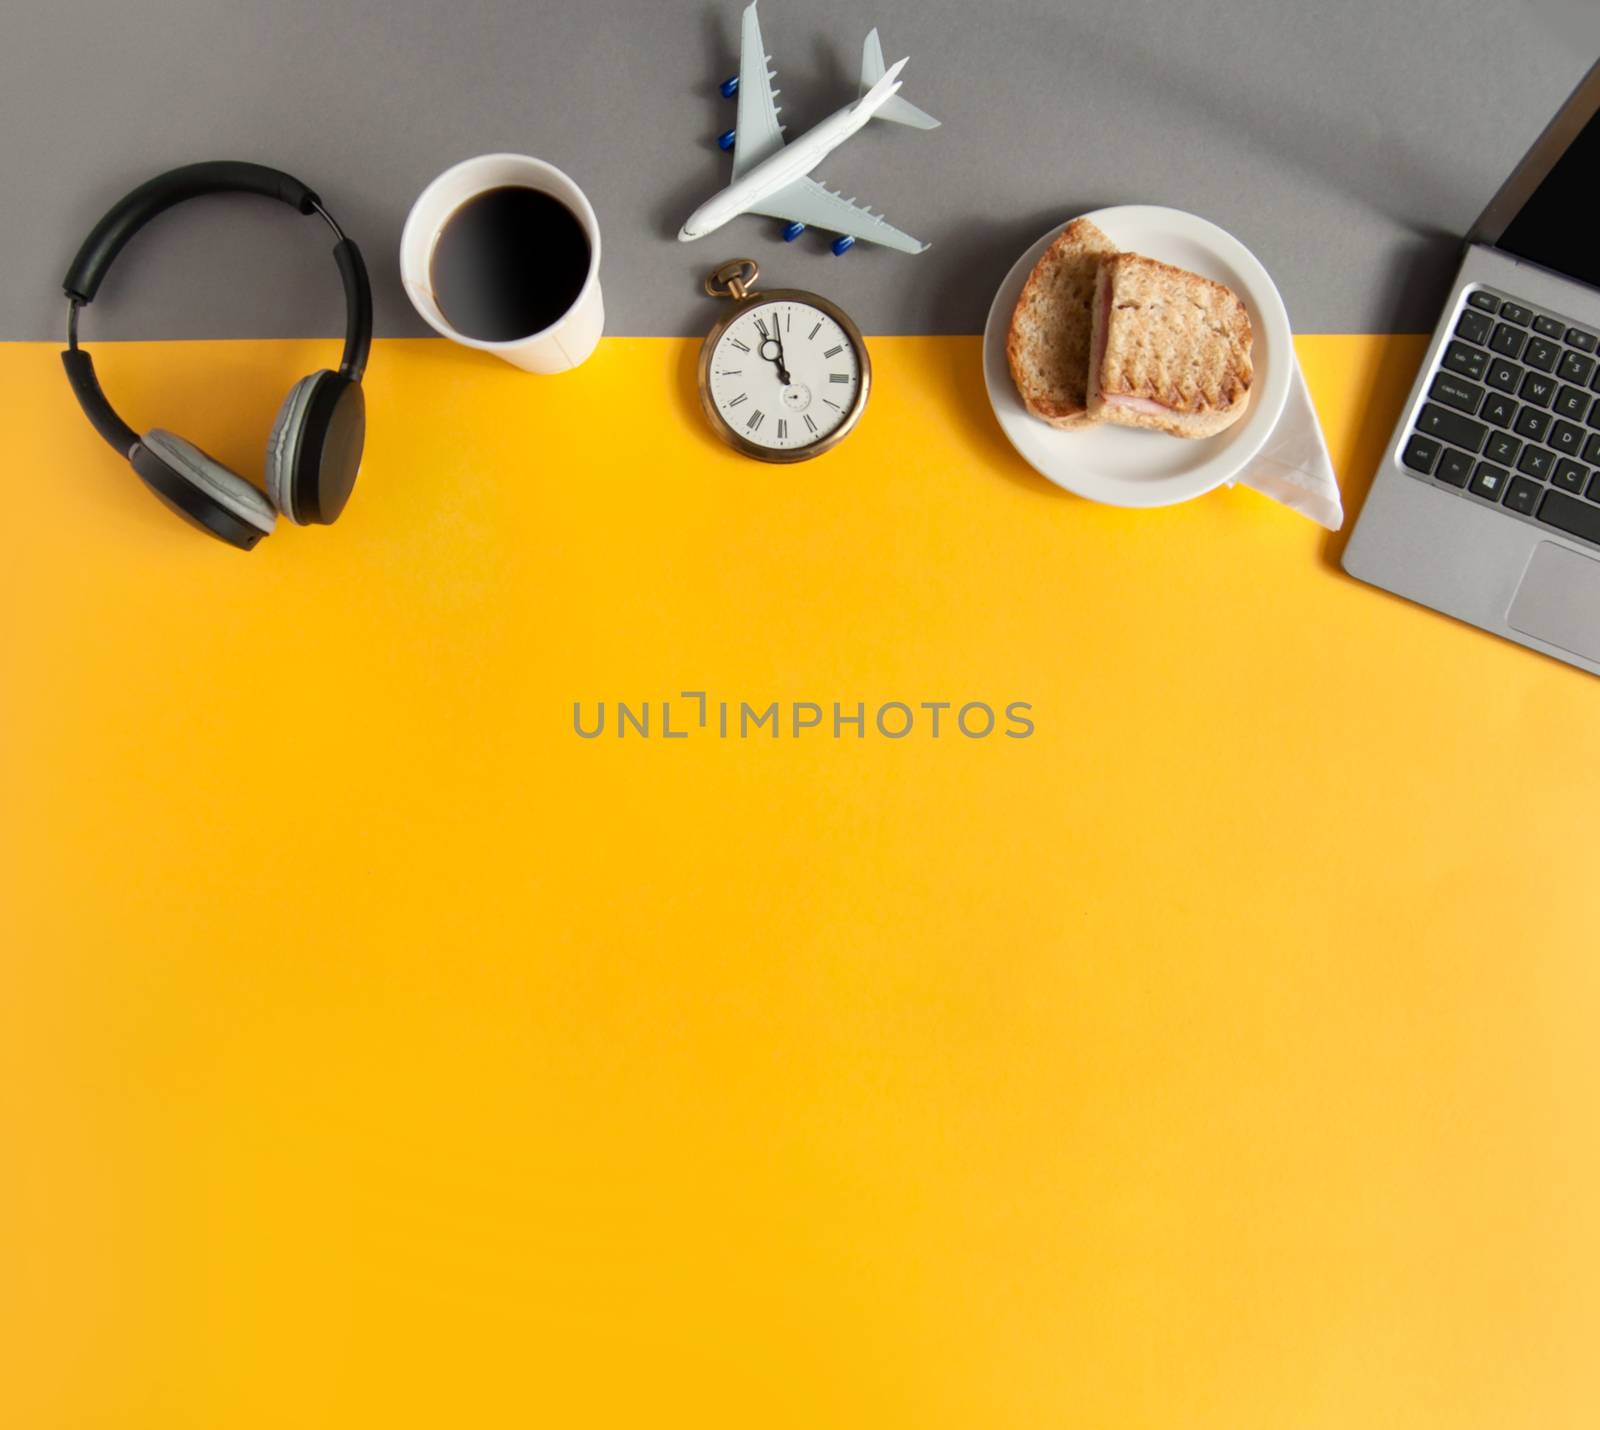 Business accessories including laptop, clock with grilled sandwich view from above